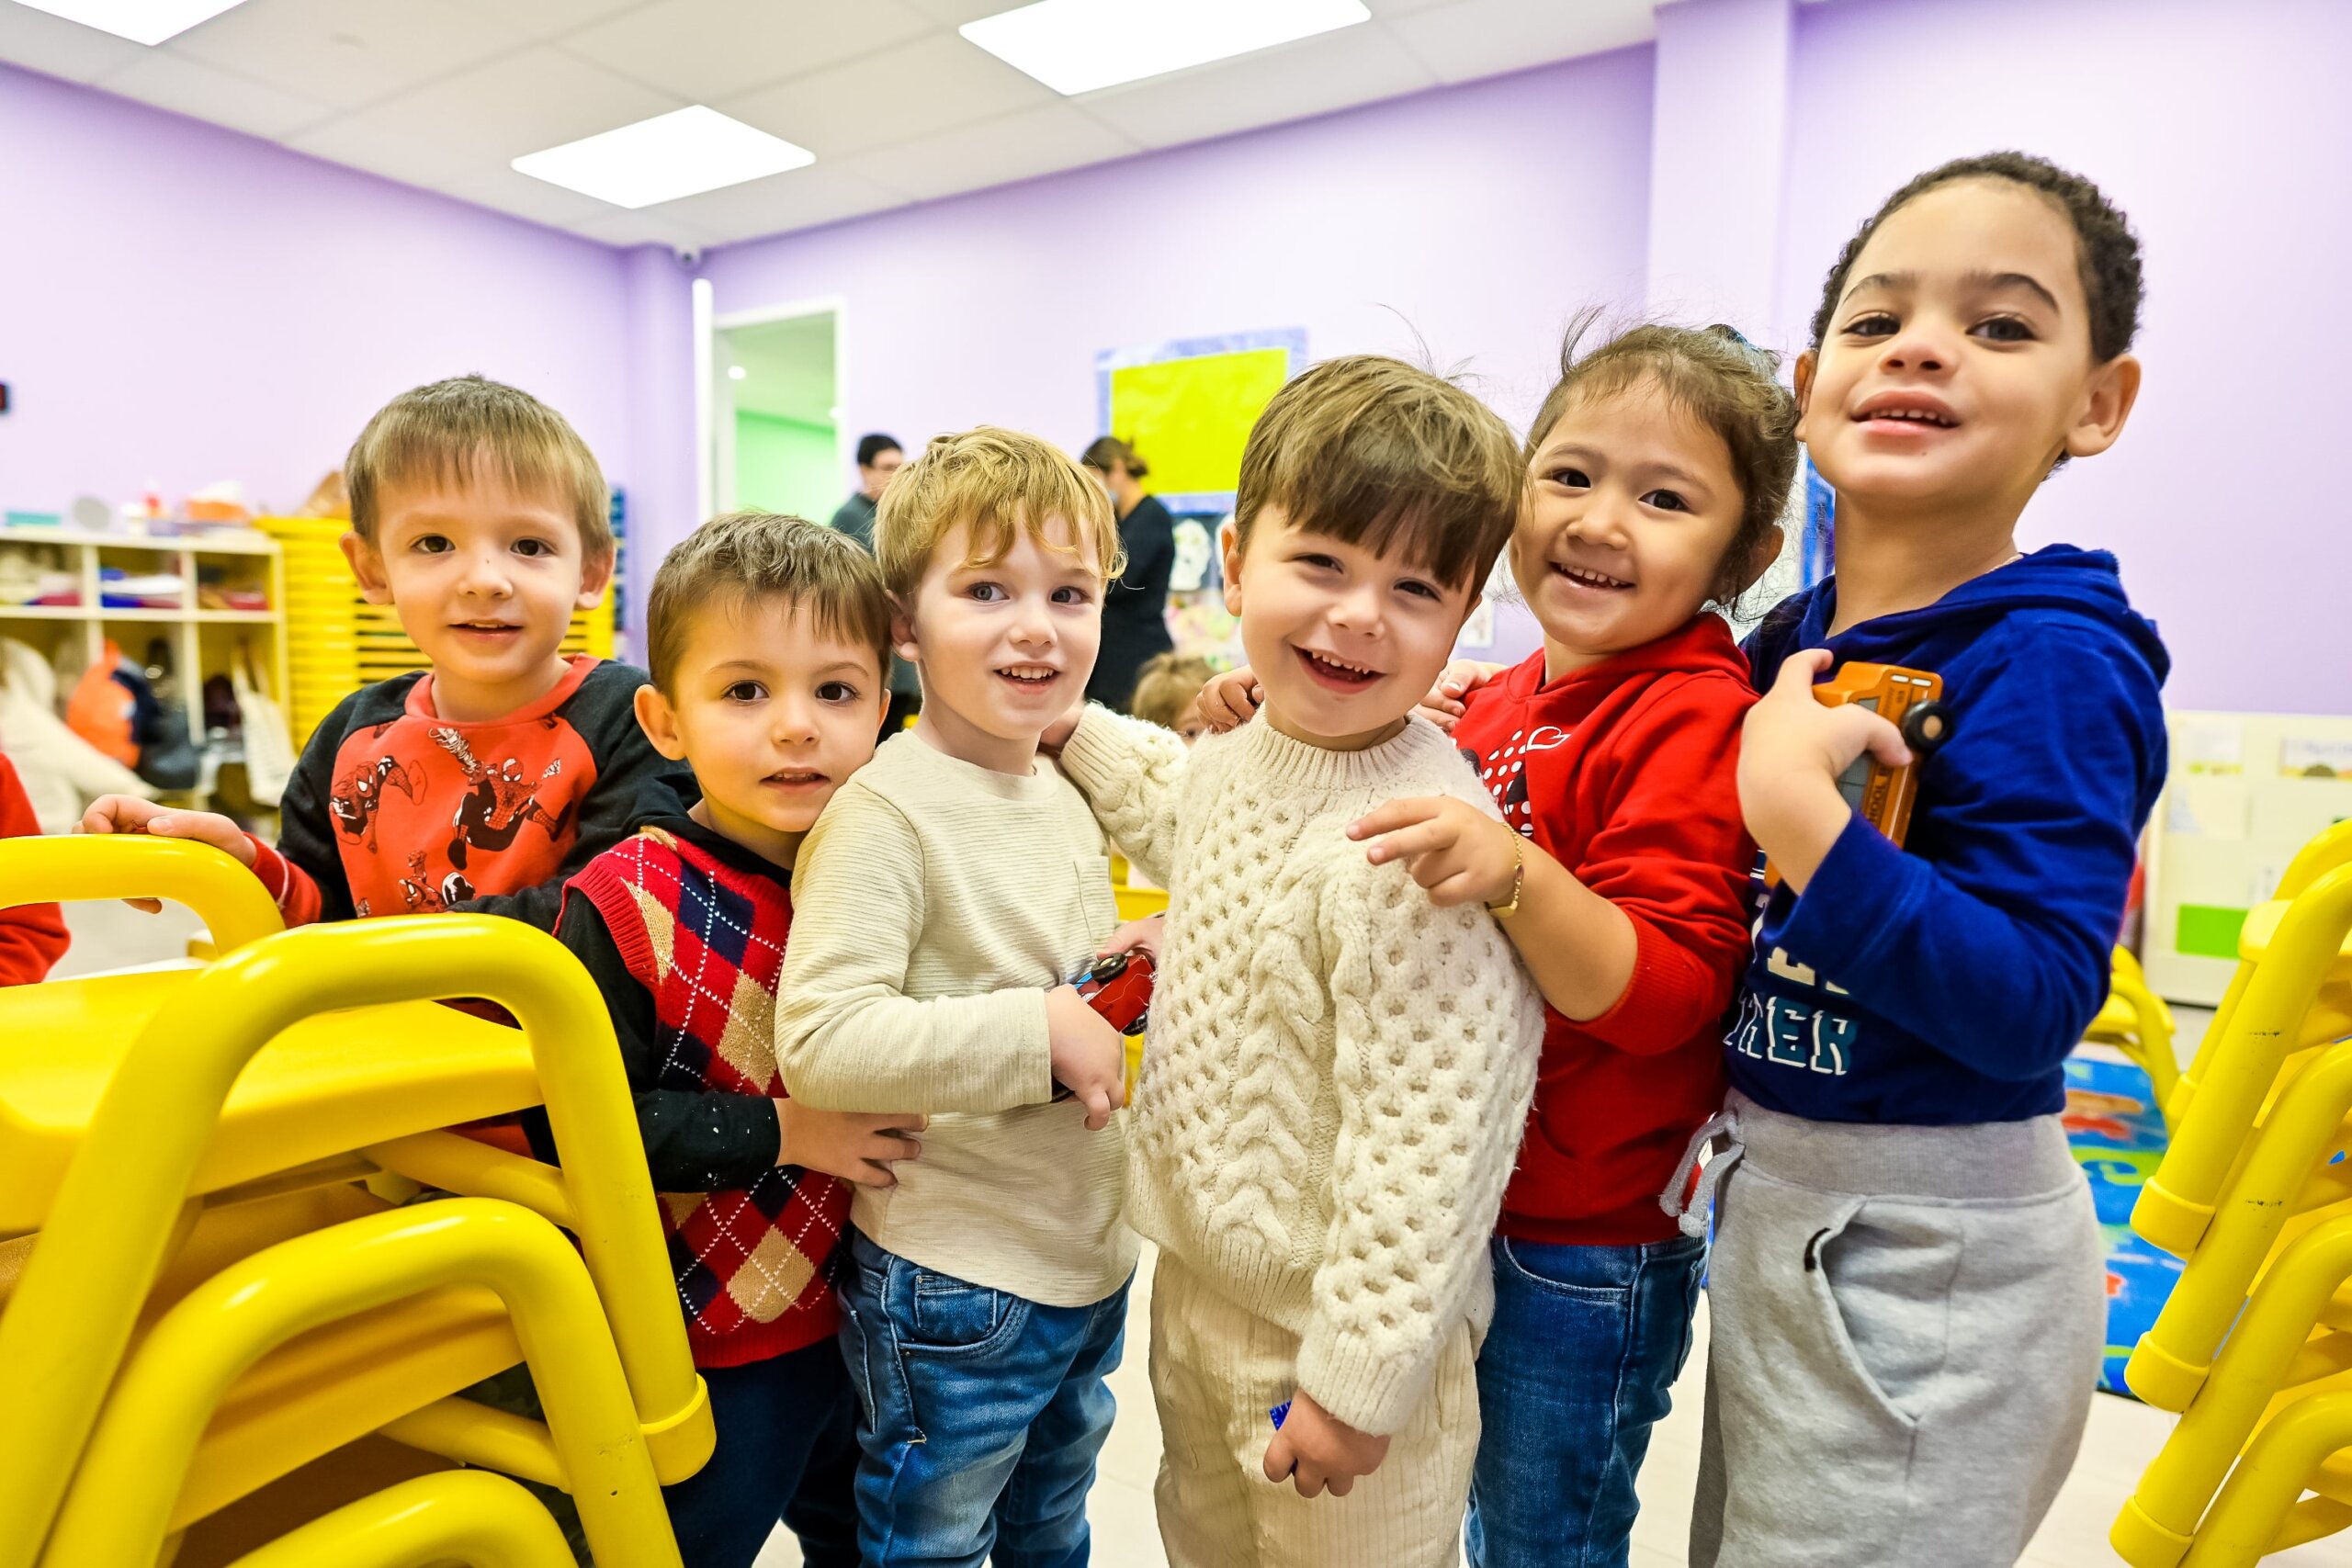 A happy group of children hugging and smiling together at Little Scholars Daycare.